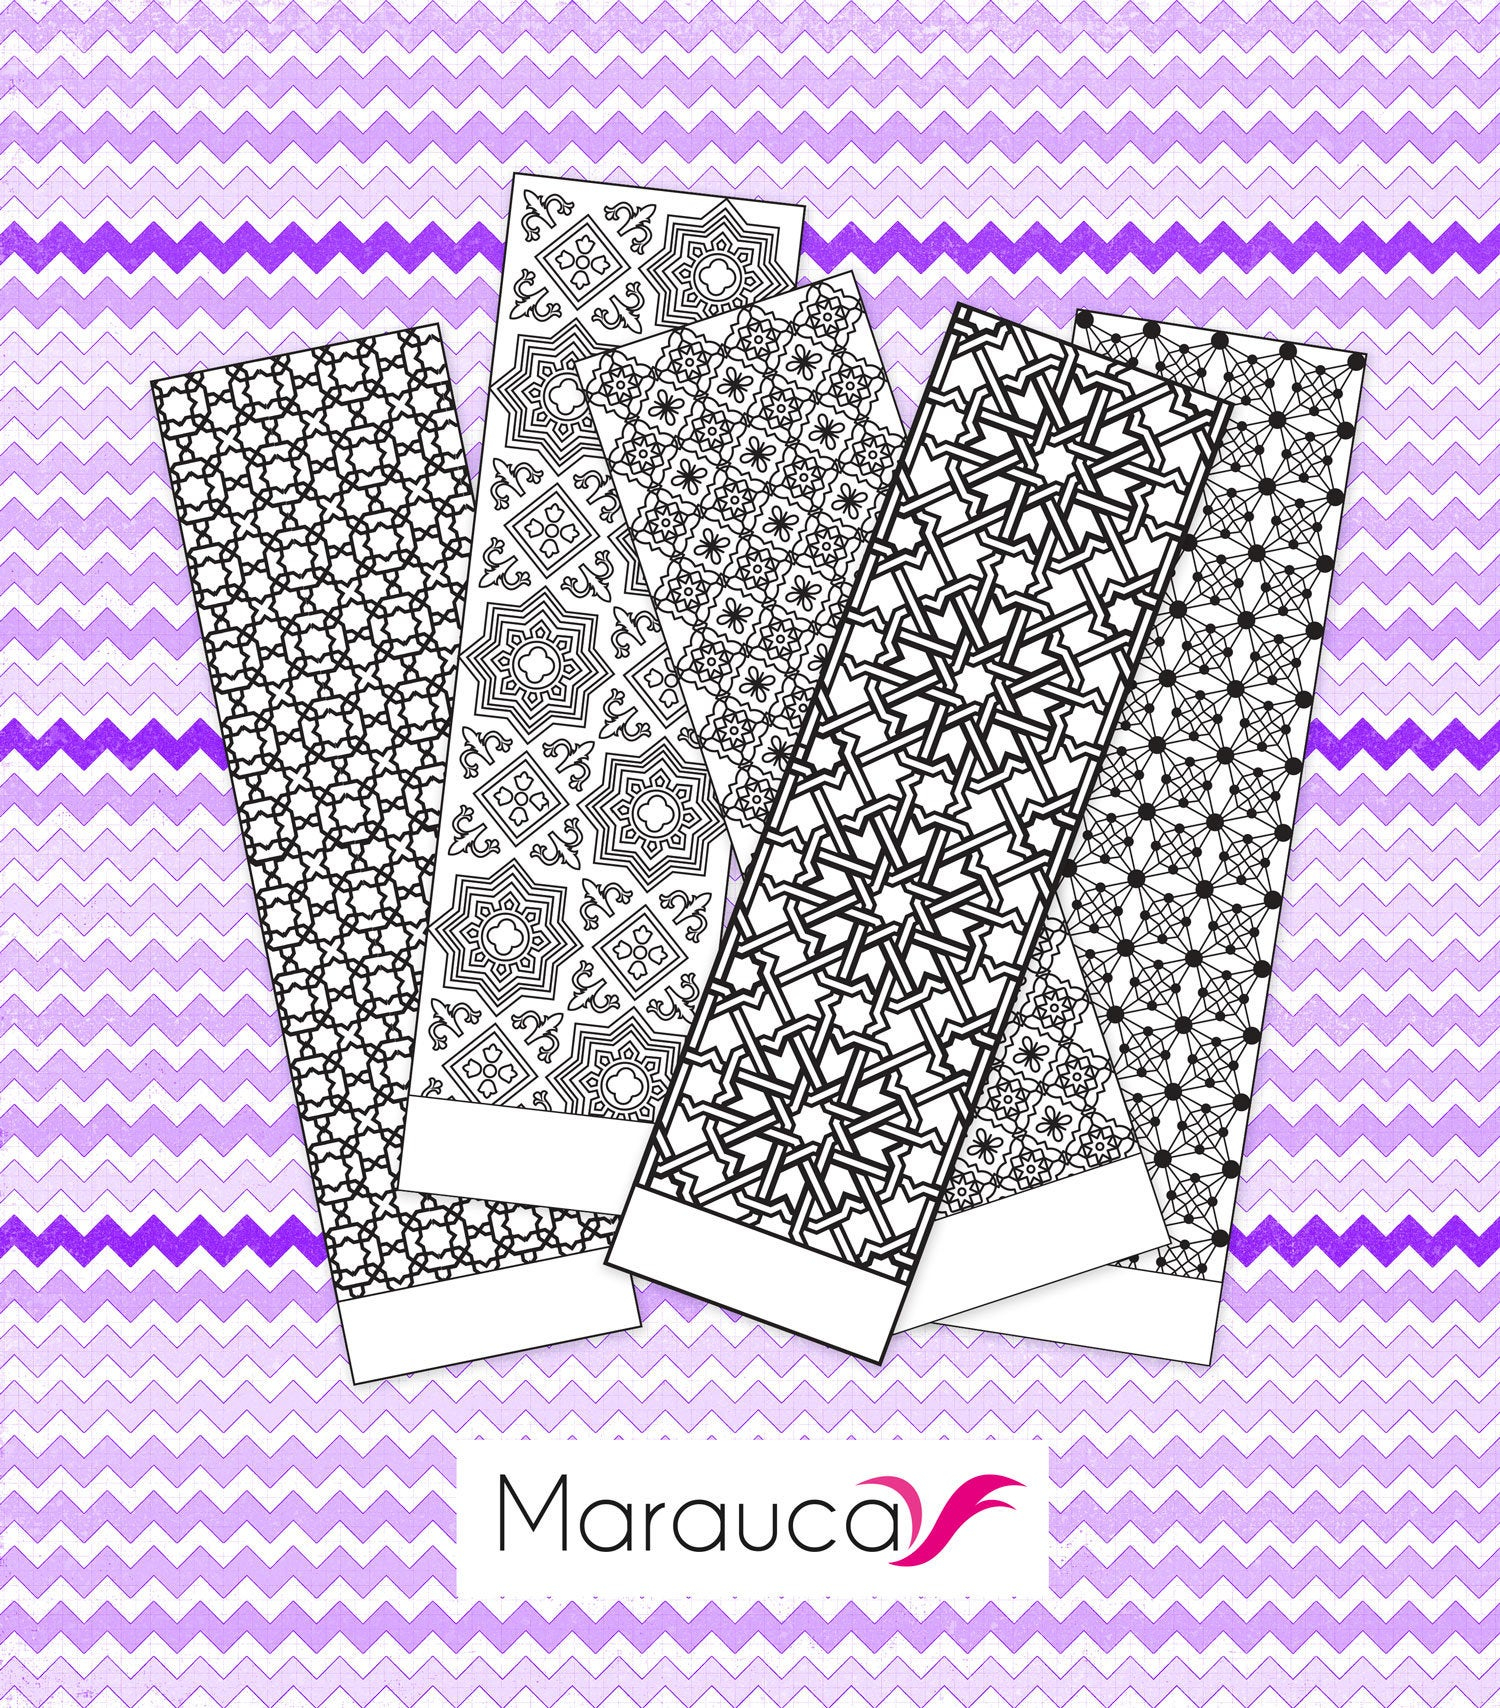 Morocco Coloring Pages 5 Bookmarks Coloring Pages Printable Moroccan Mosaic Islamic Art Arabic Instant Download Mosaic Coloring Bookmark Mosaic Tile Morocco